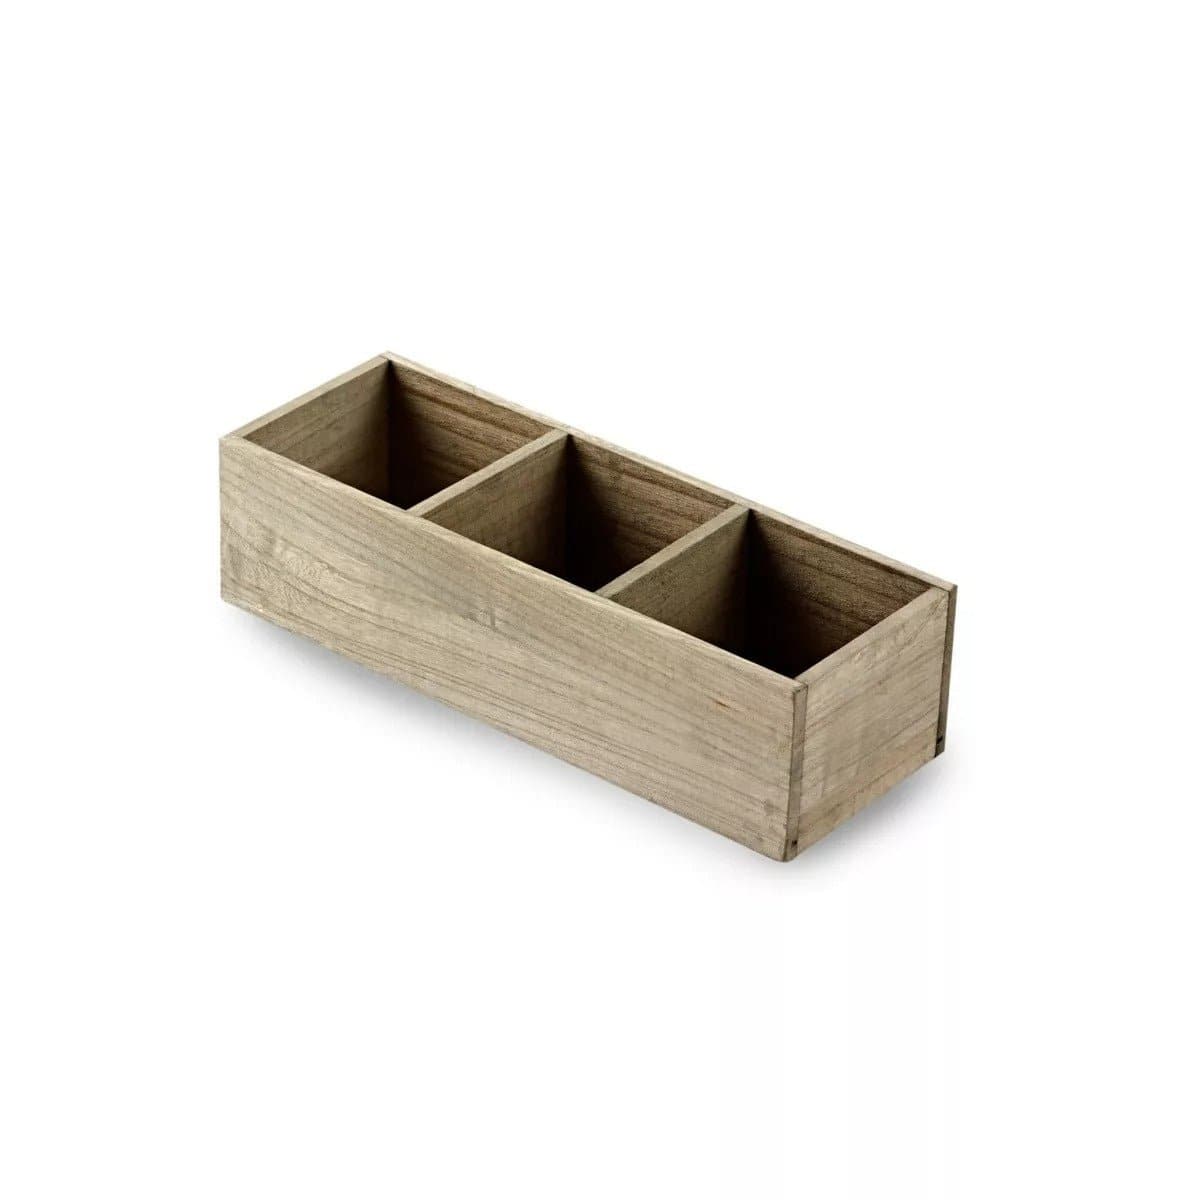 Wooden Storage Box with Dividers - bhma